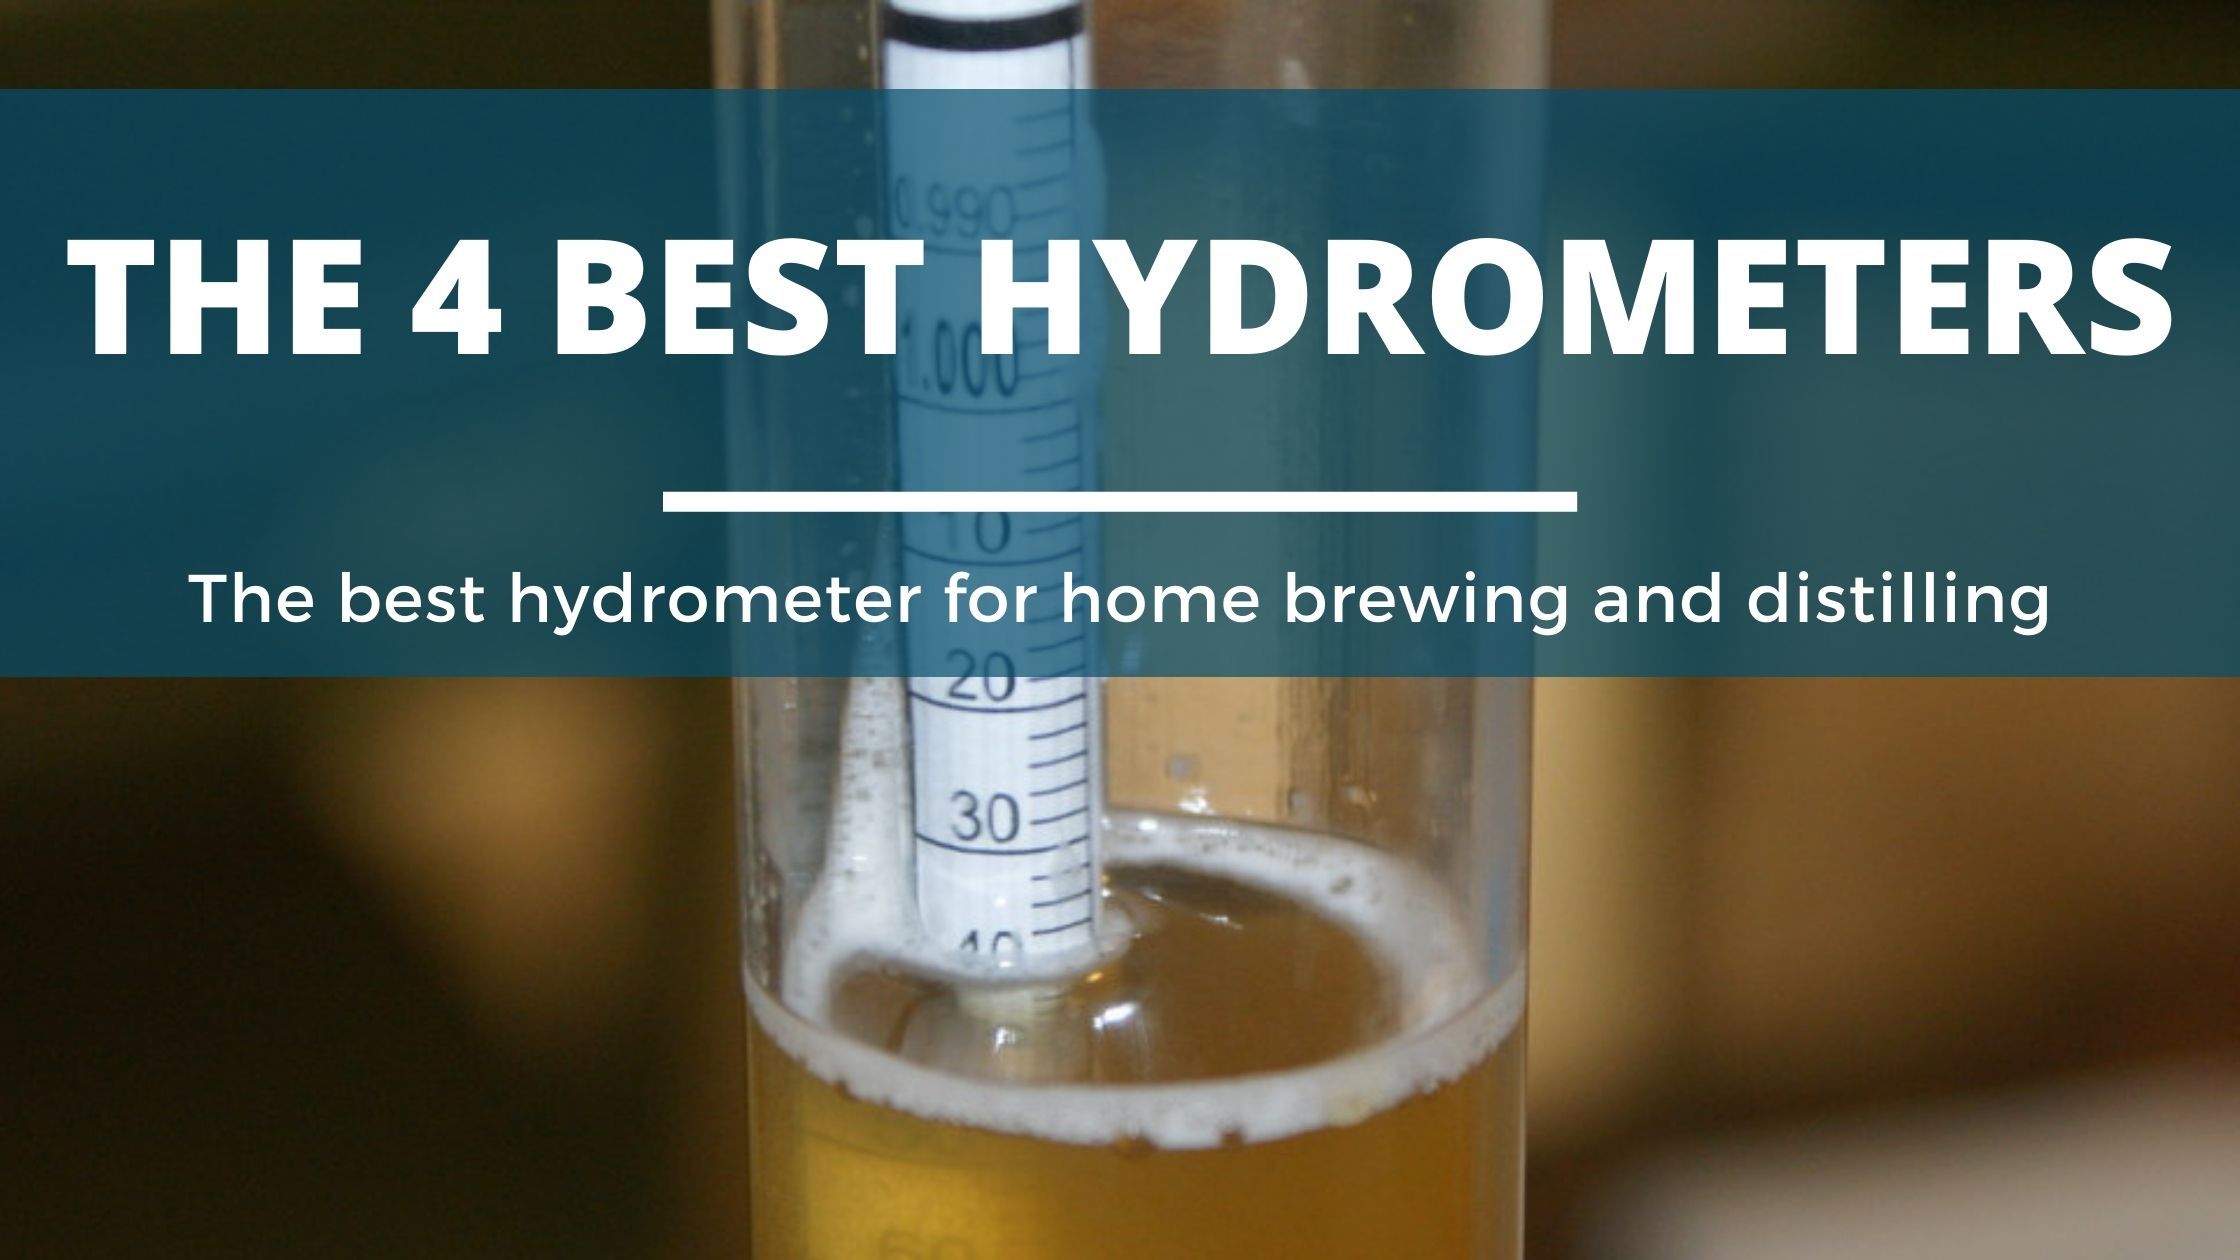 Image of diy distilling the 4 best hydrometers for home brewing and distilling